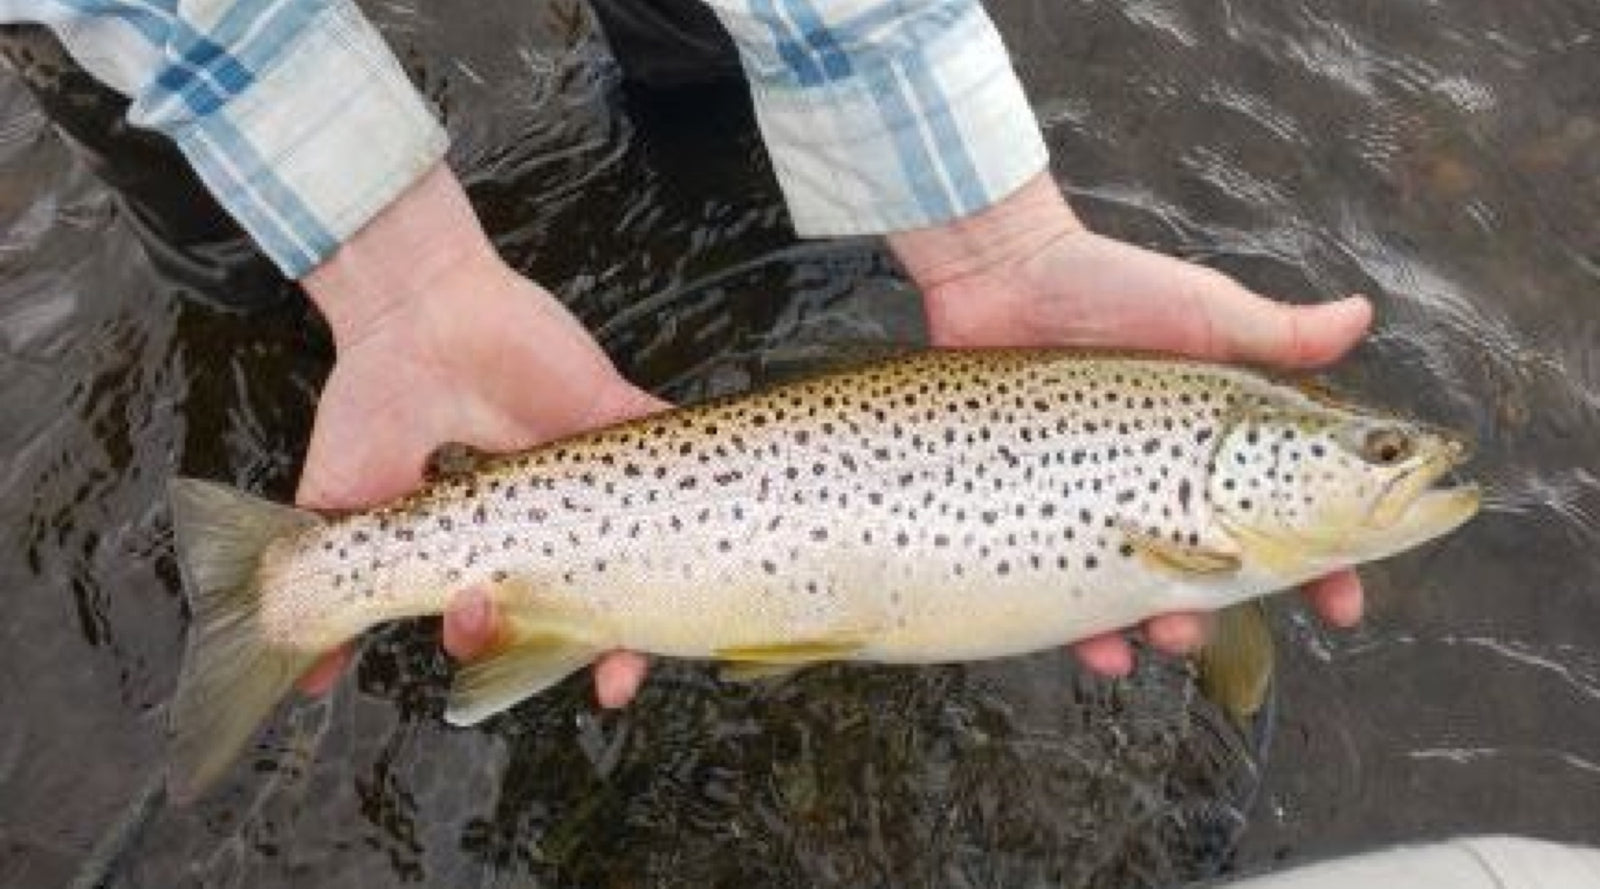 Northeast Fishing Report: 6/14/19 - The Compleat Angler